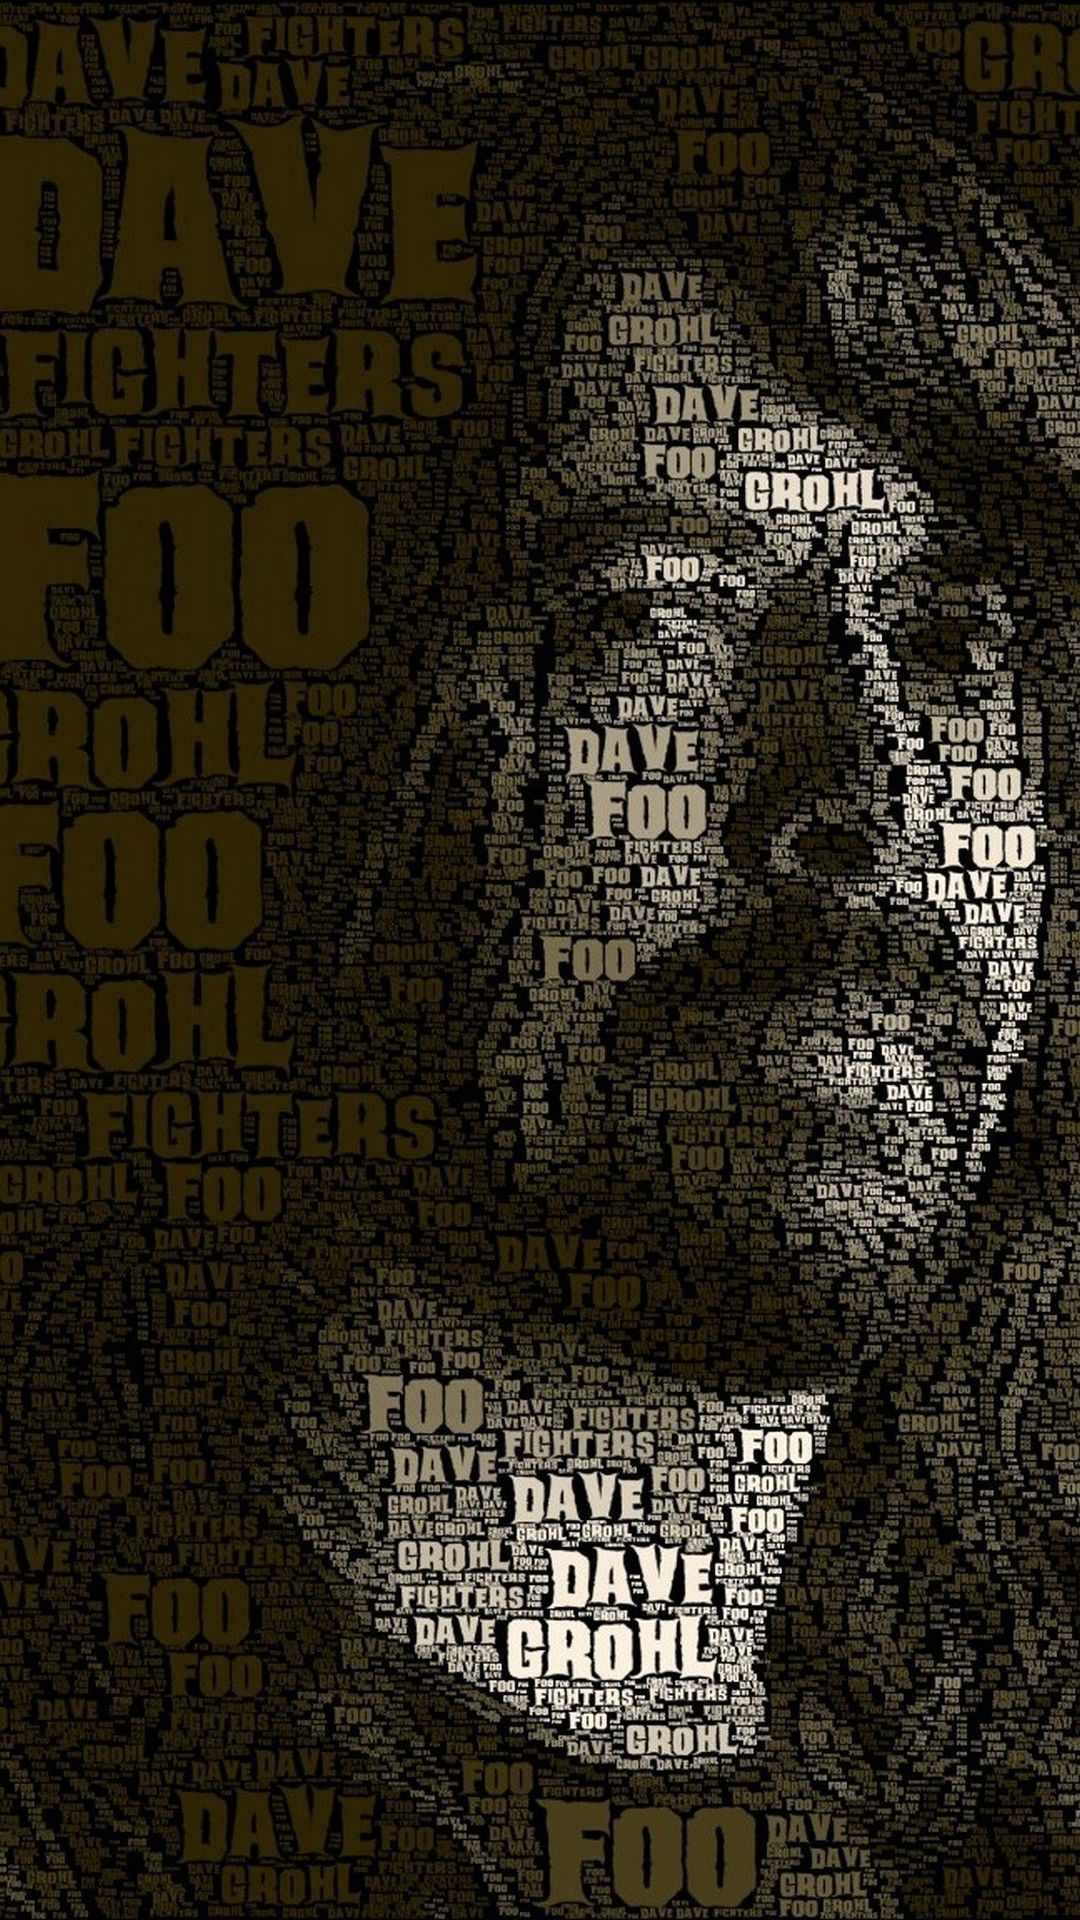 Foo Fighters: Dave Grohl, Band's founder. 1080x1920 Full HD Background.